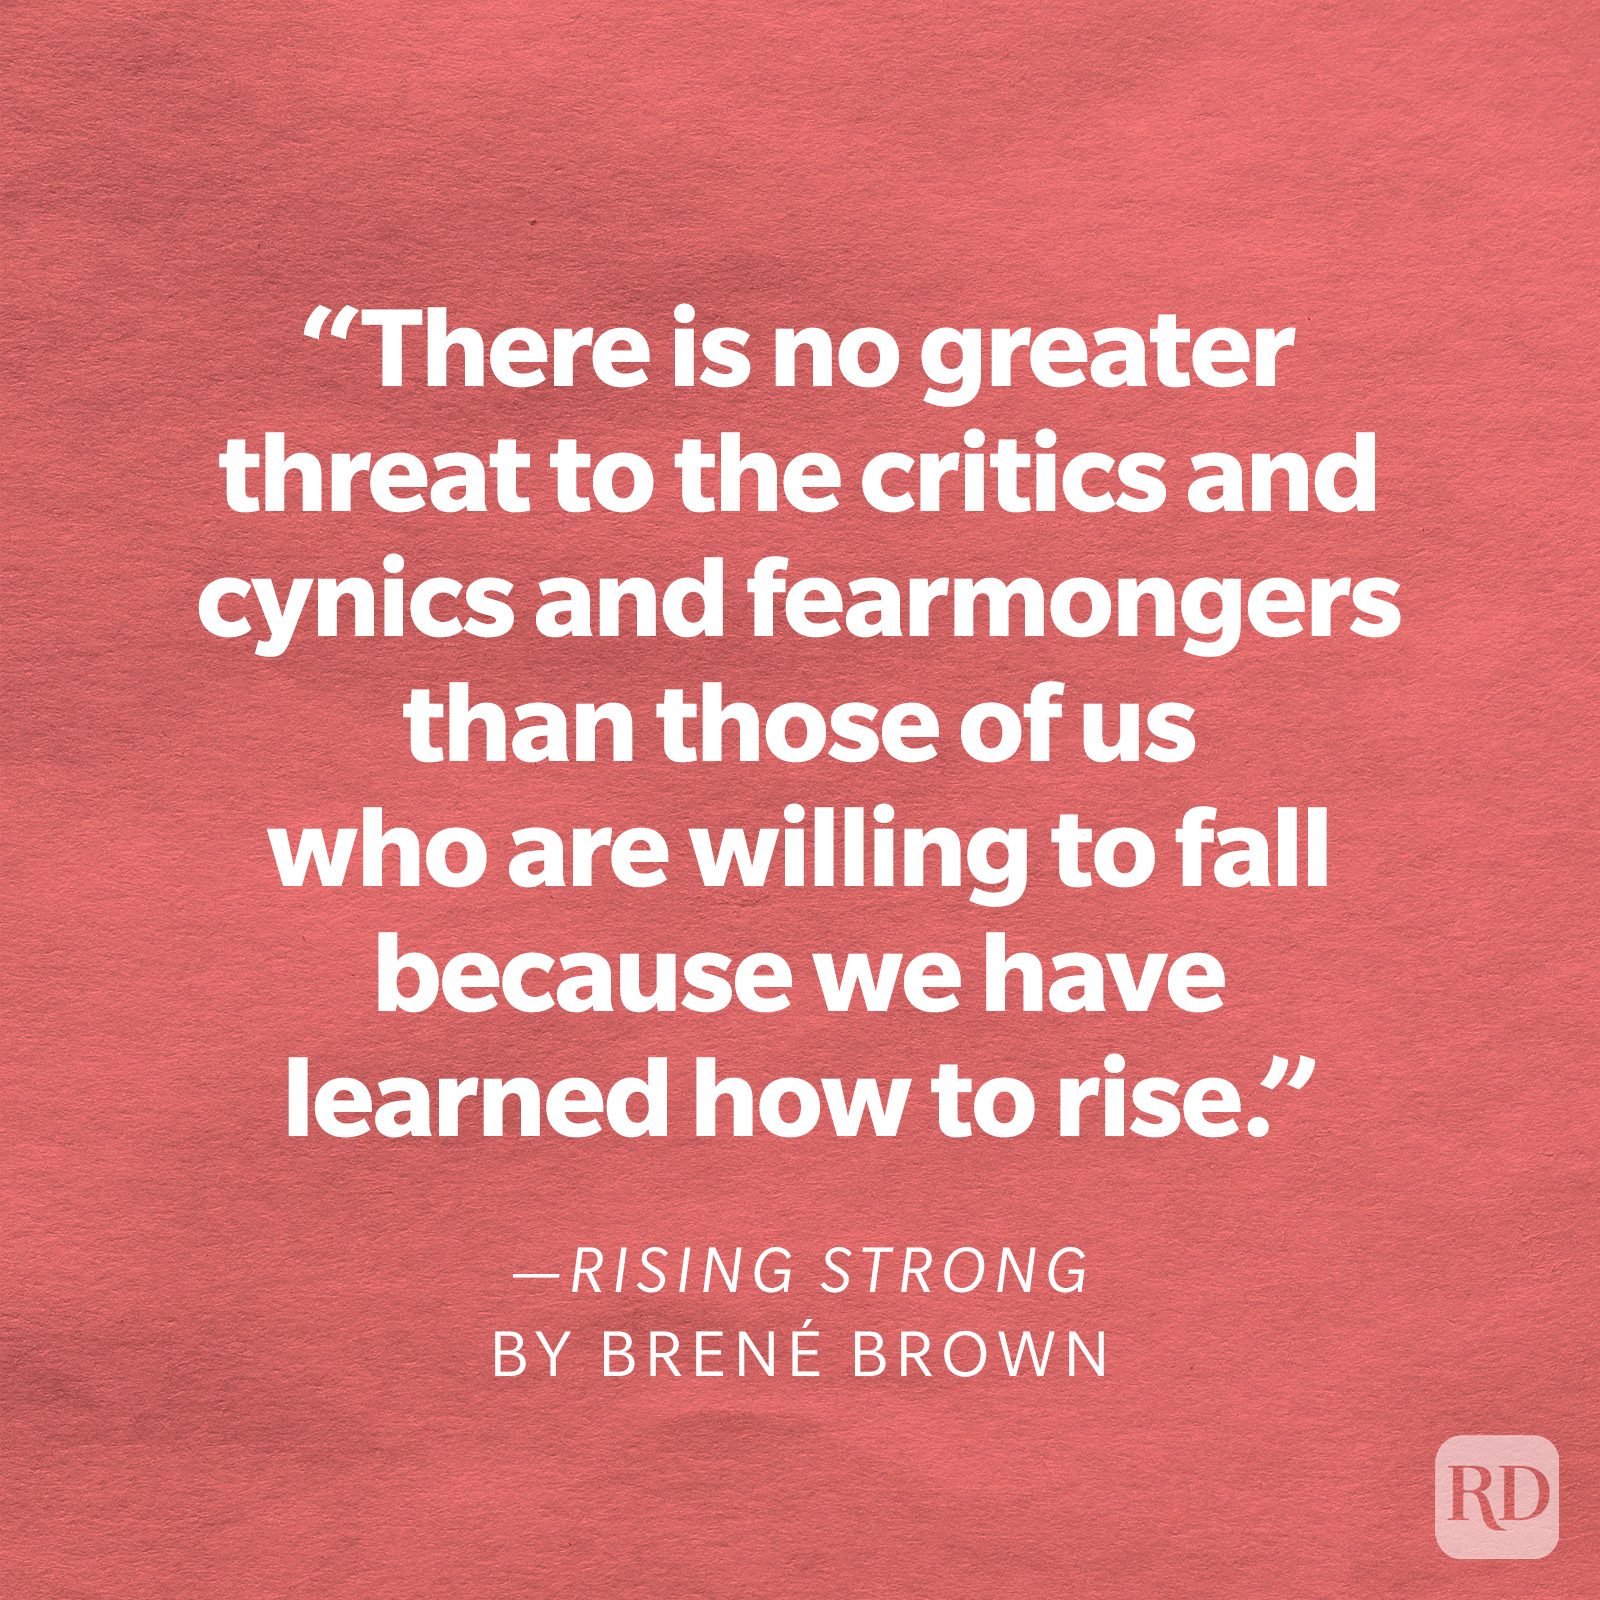 Rising Strong by Brené Brown "There is no greater threat to the critics and cynics and fearmongers than those of us who are willing to fall because we have learned how to rise."